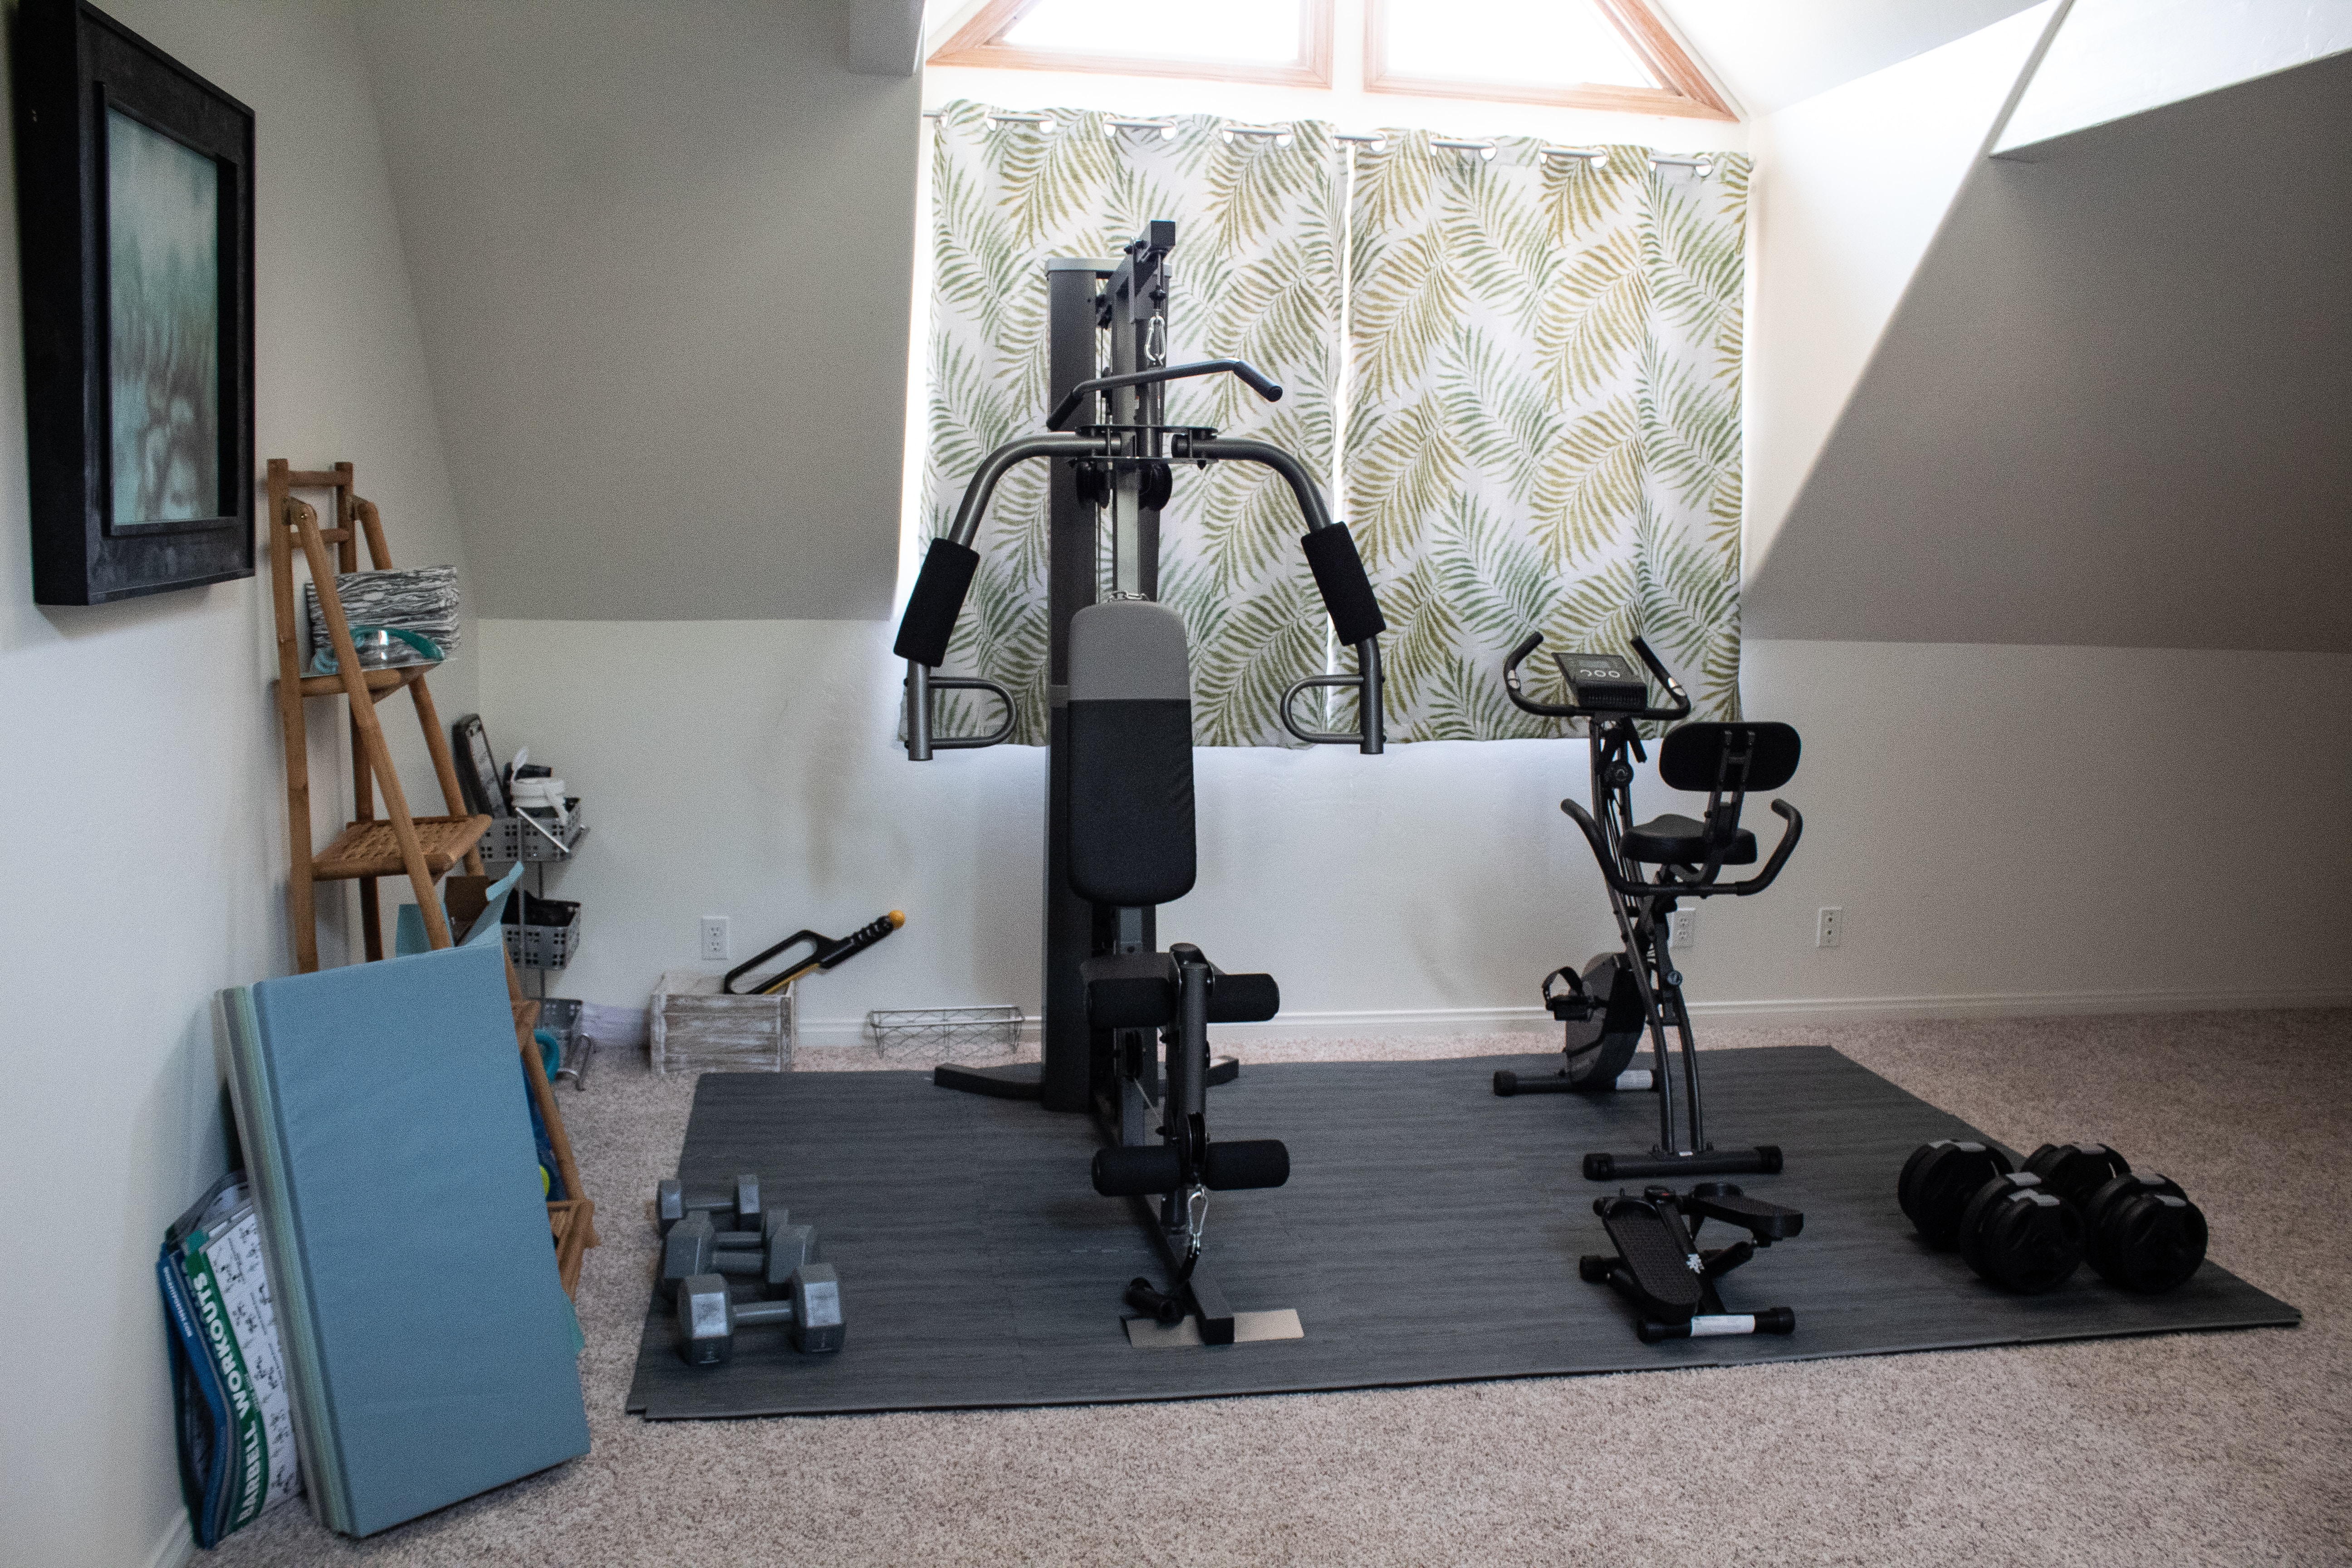 Home gym set up with a bike and weight lifting equipment.